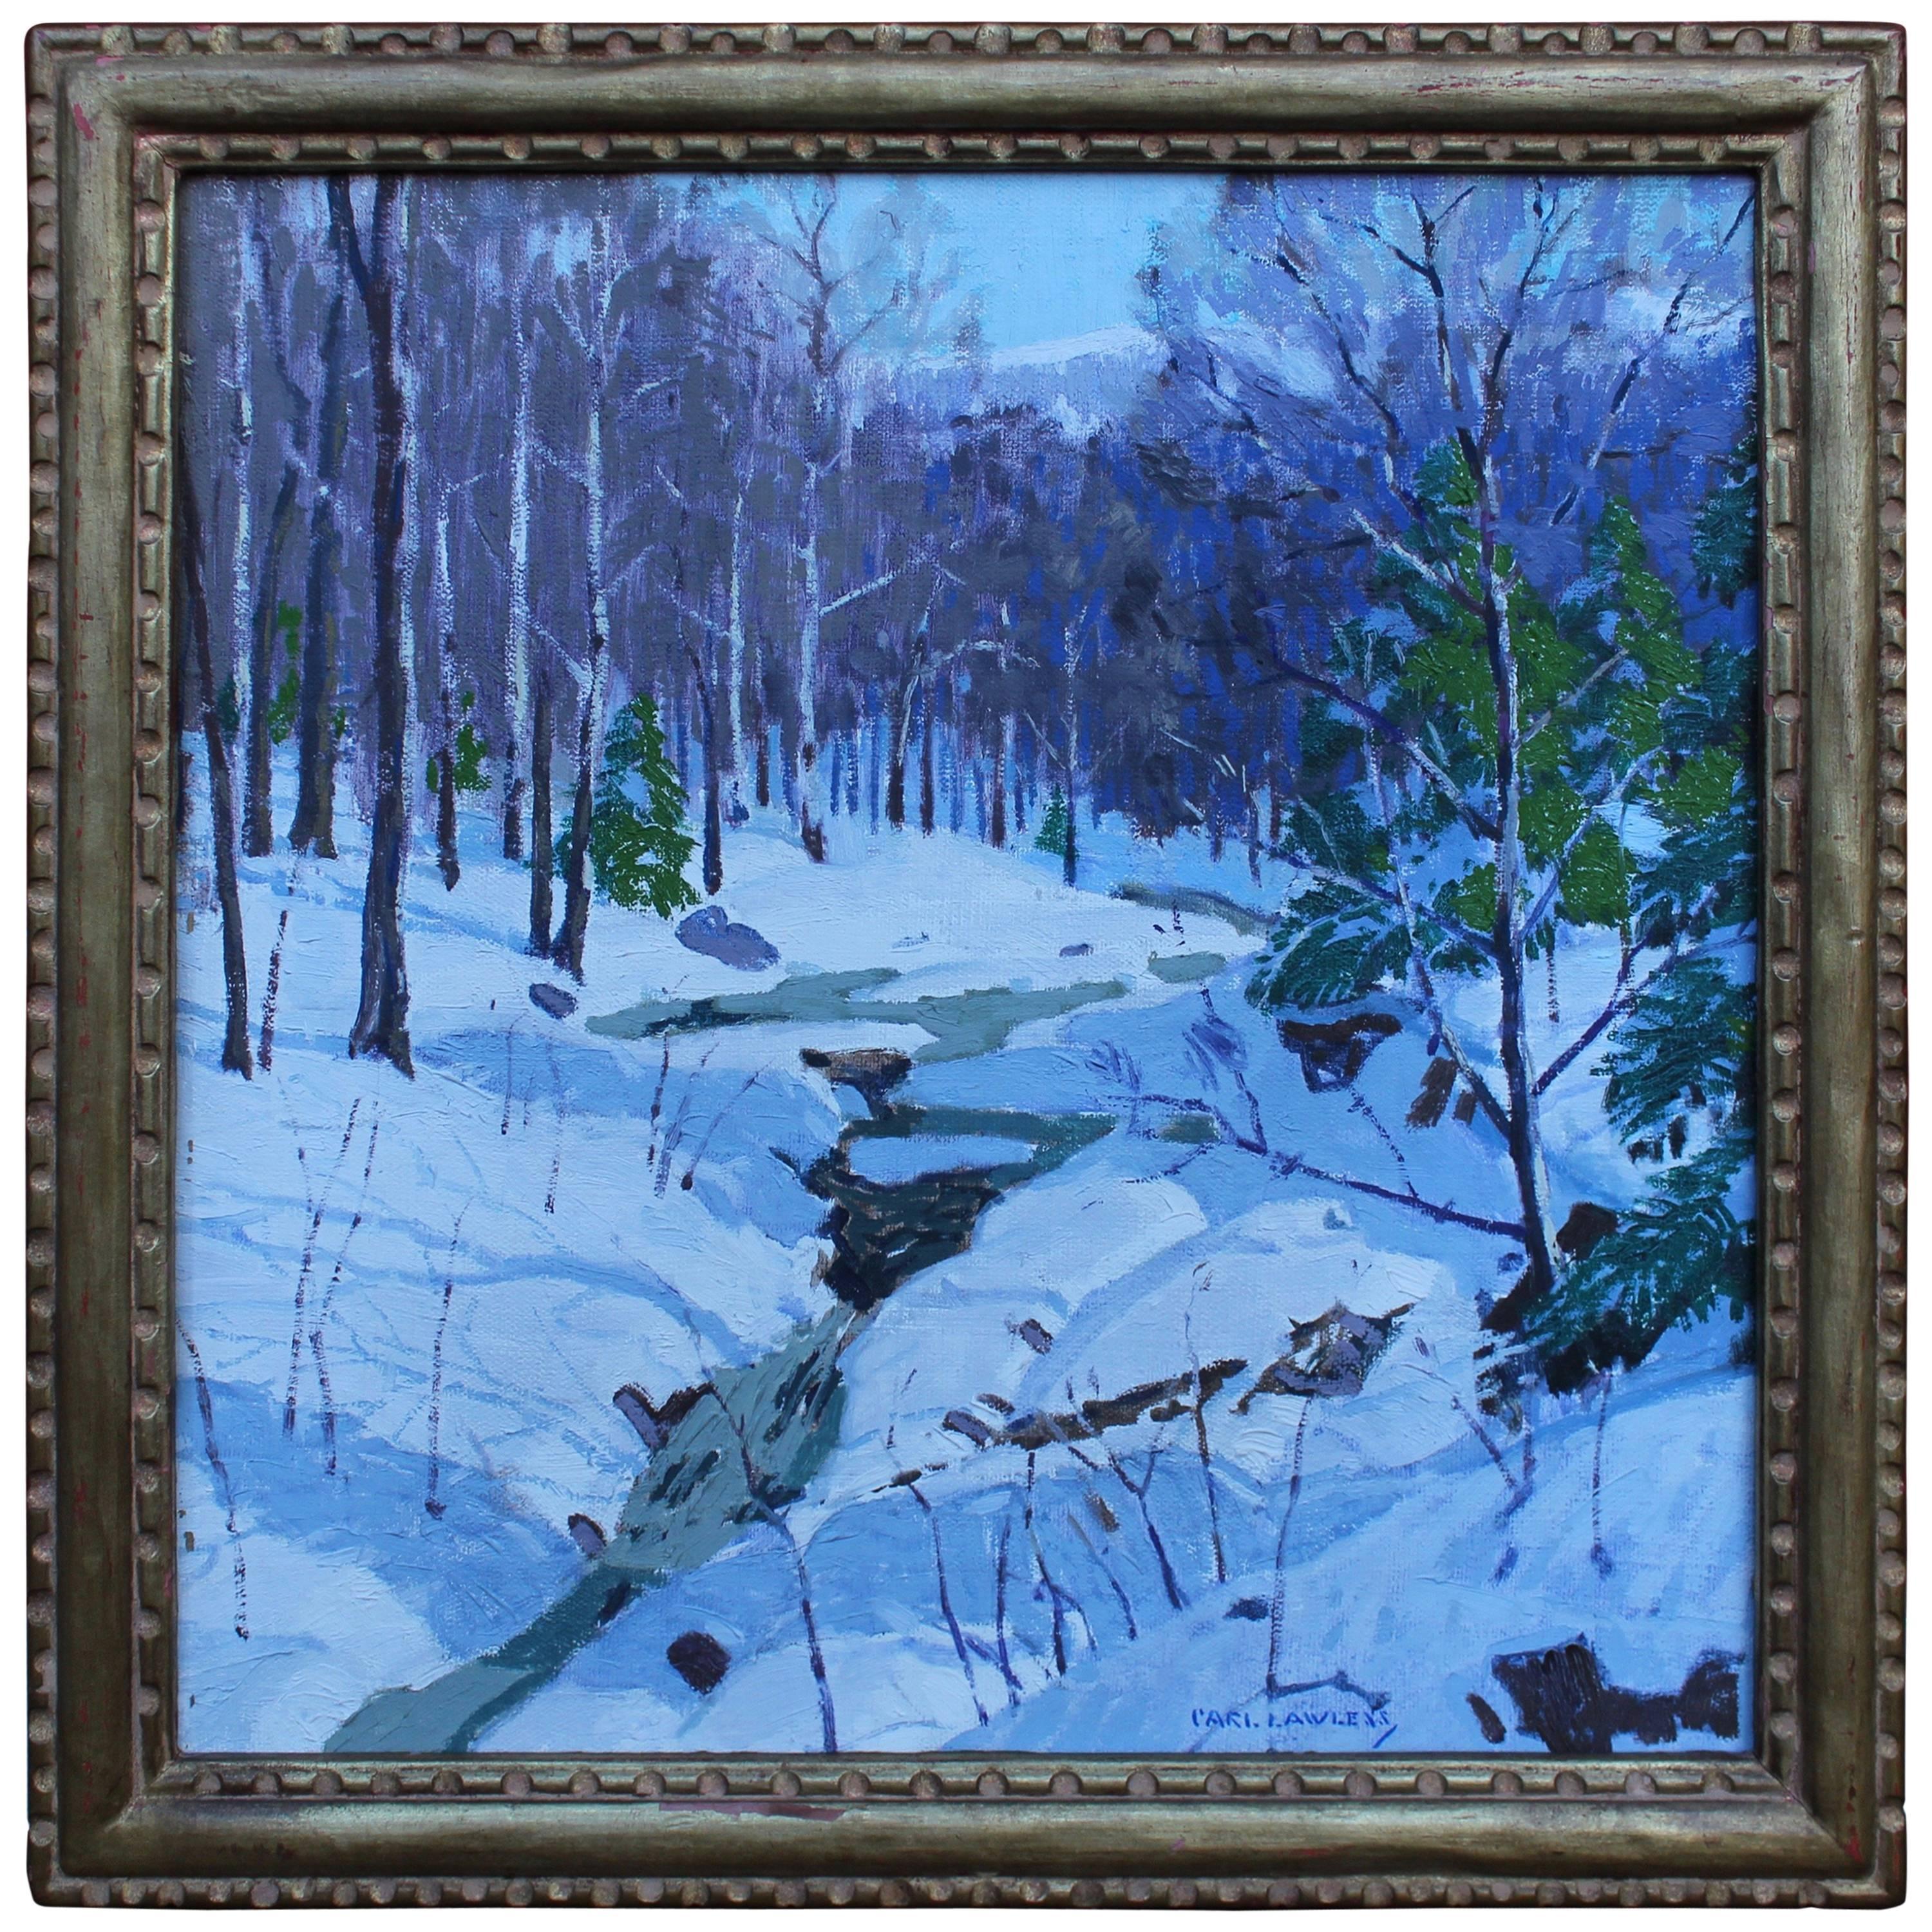 "Vermont Winter" by Carl Lawless